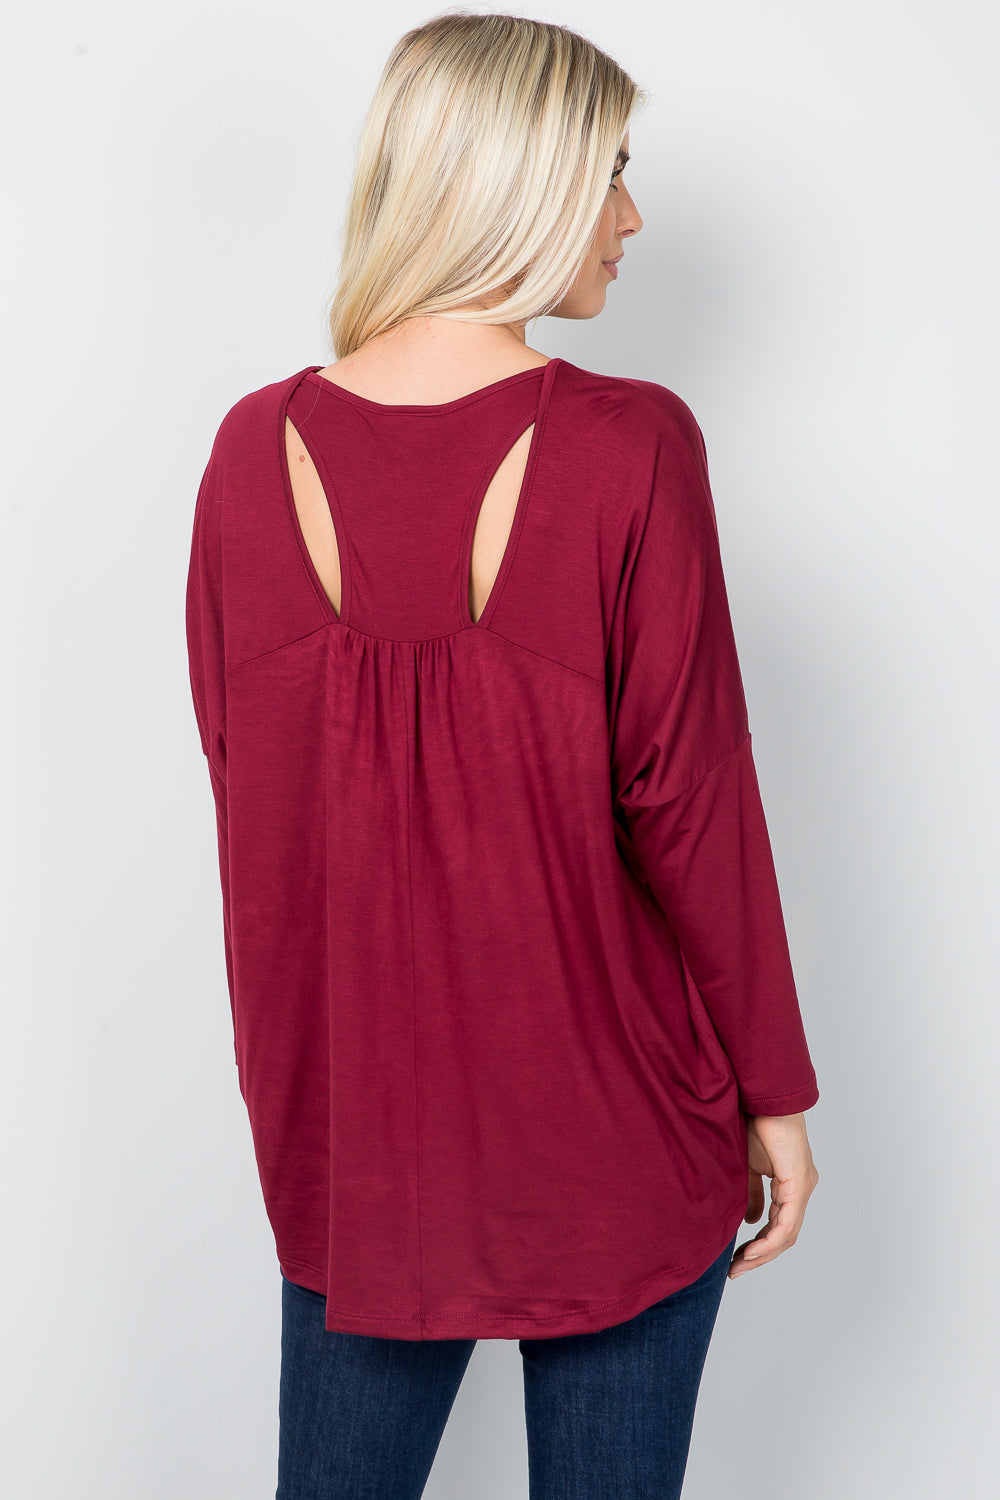 Be Stage Dolman in Black with Cut out In Burgundy